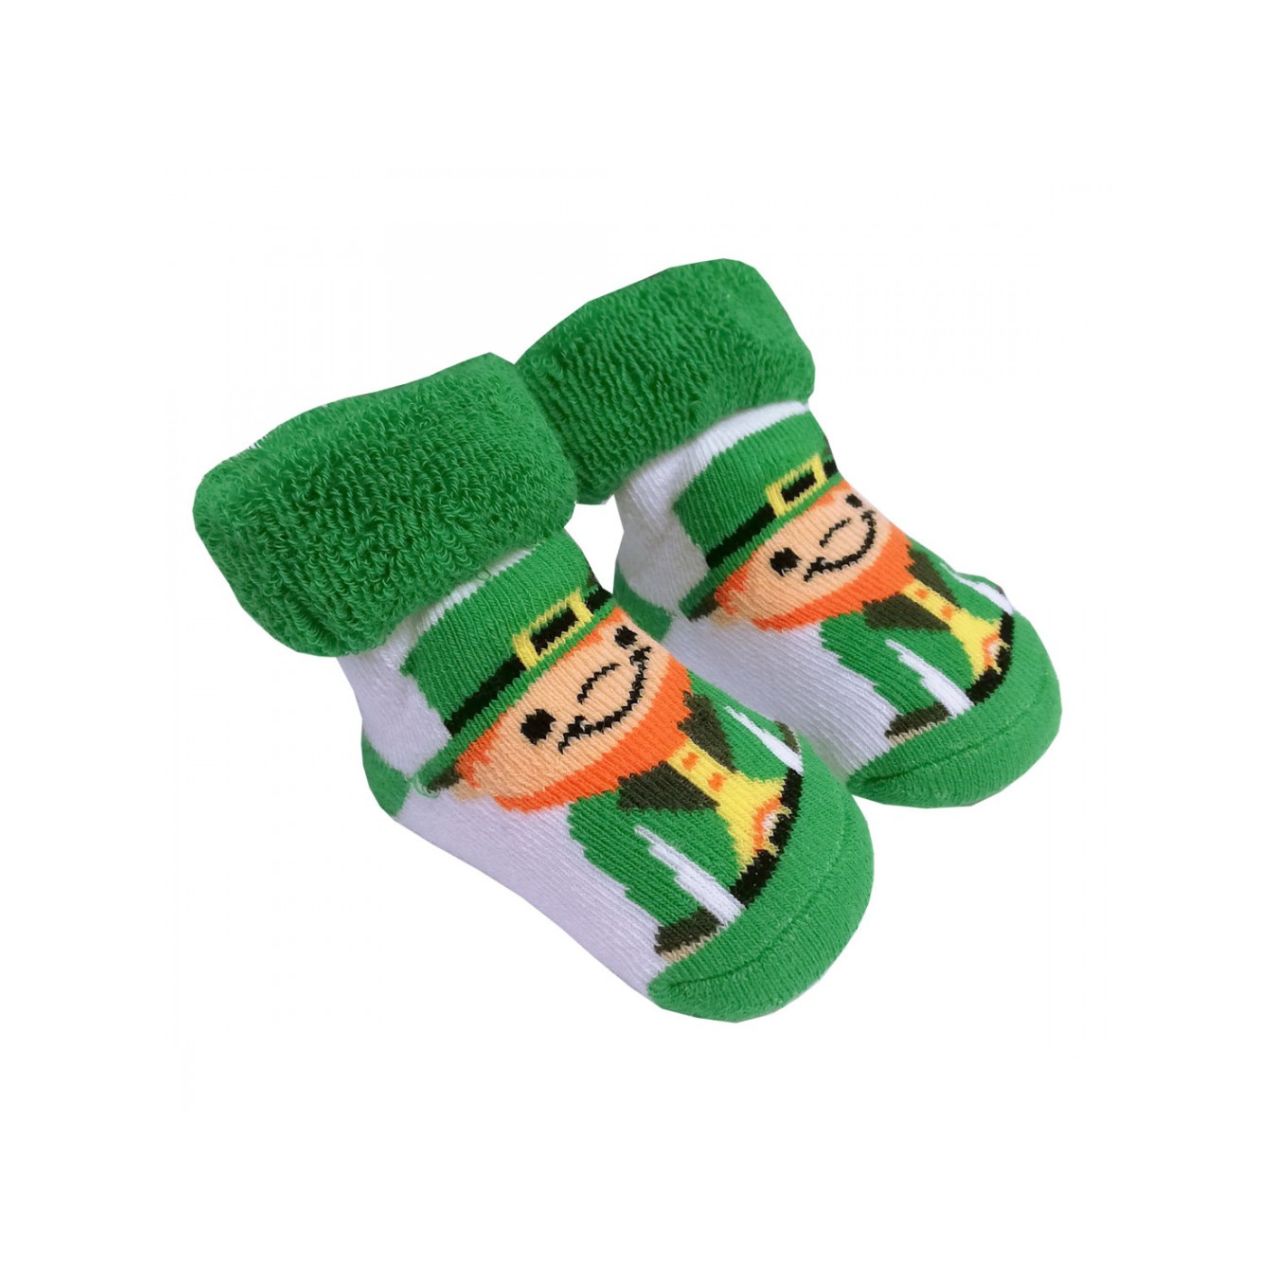 Green & White Leprechaun Toe Baby Booties  These fun green and white baby booties part of the Traditional Craft Official Collection. They feature a little leprechaun on each foot.